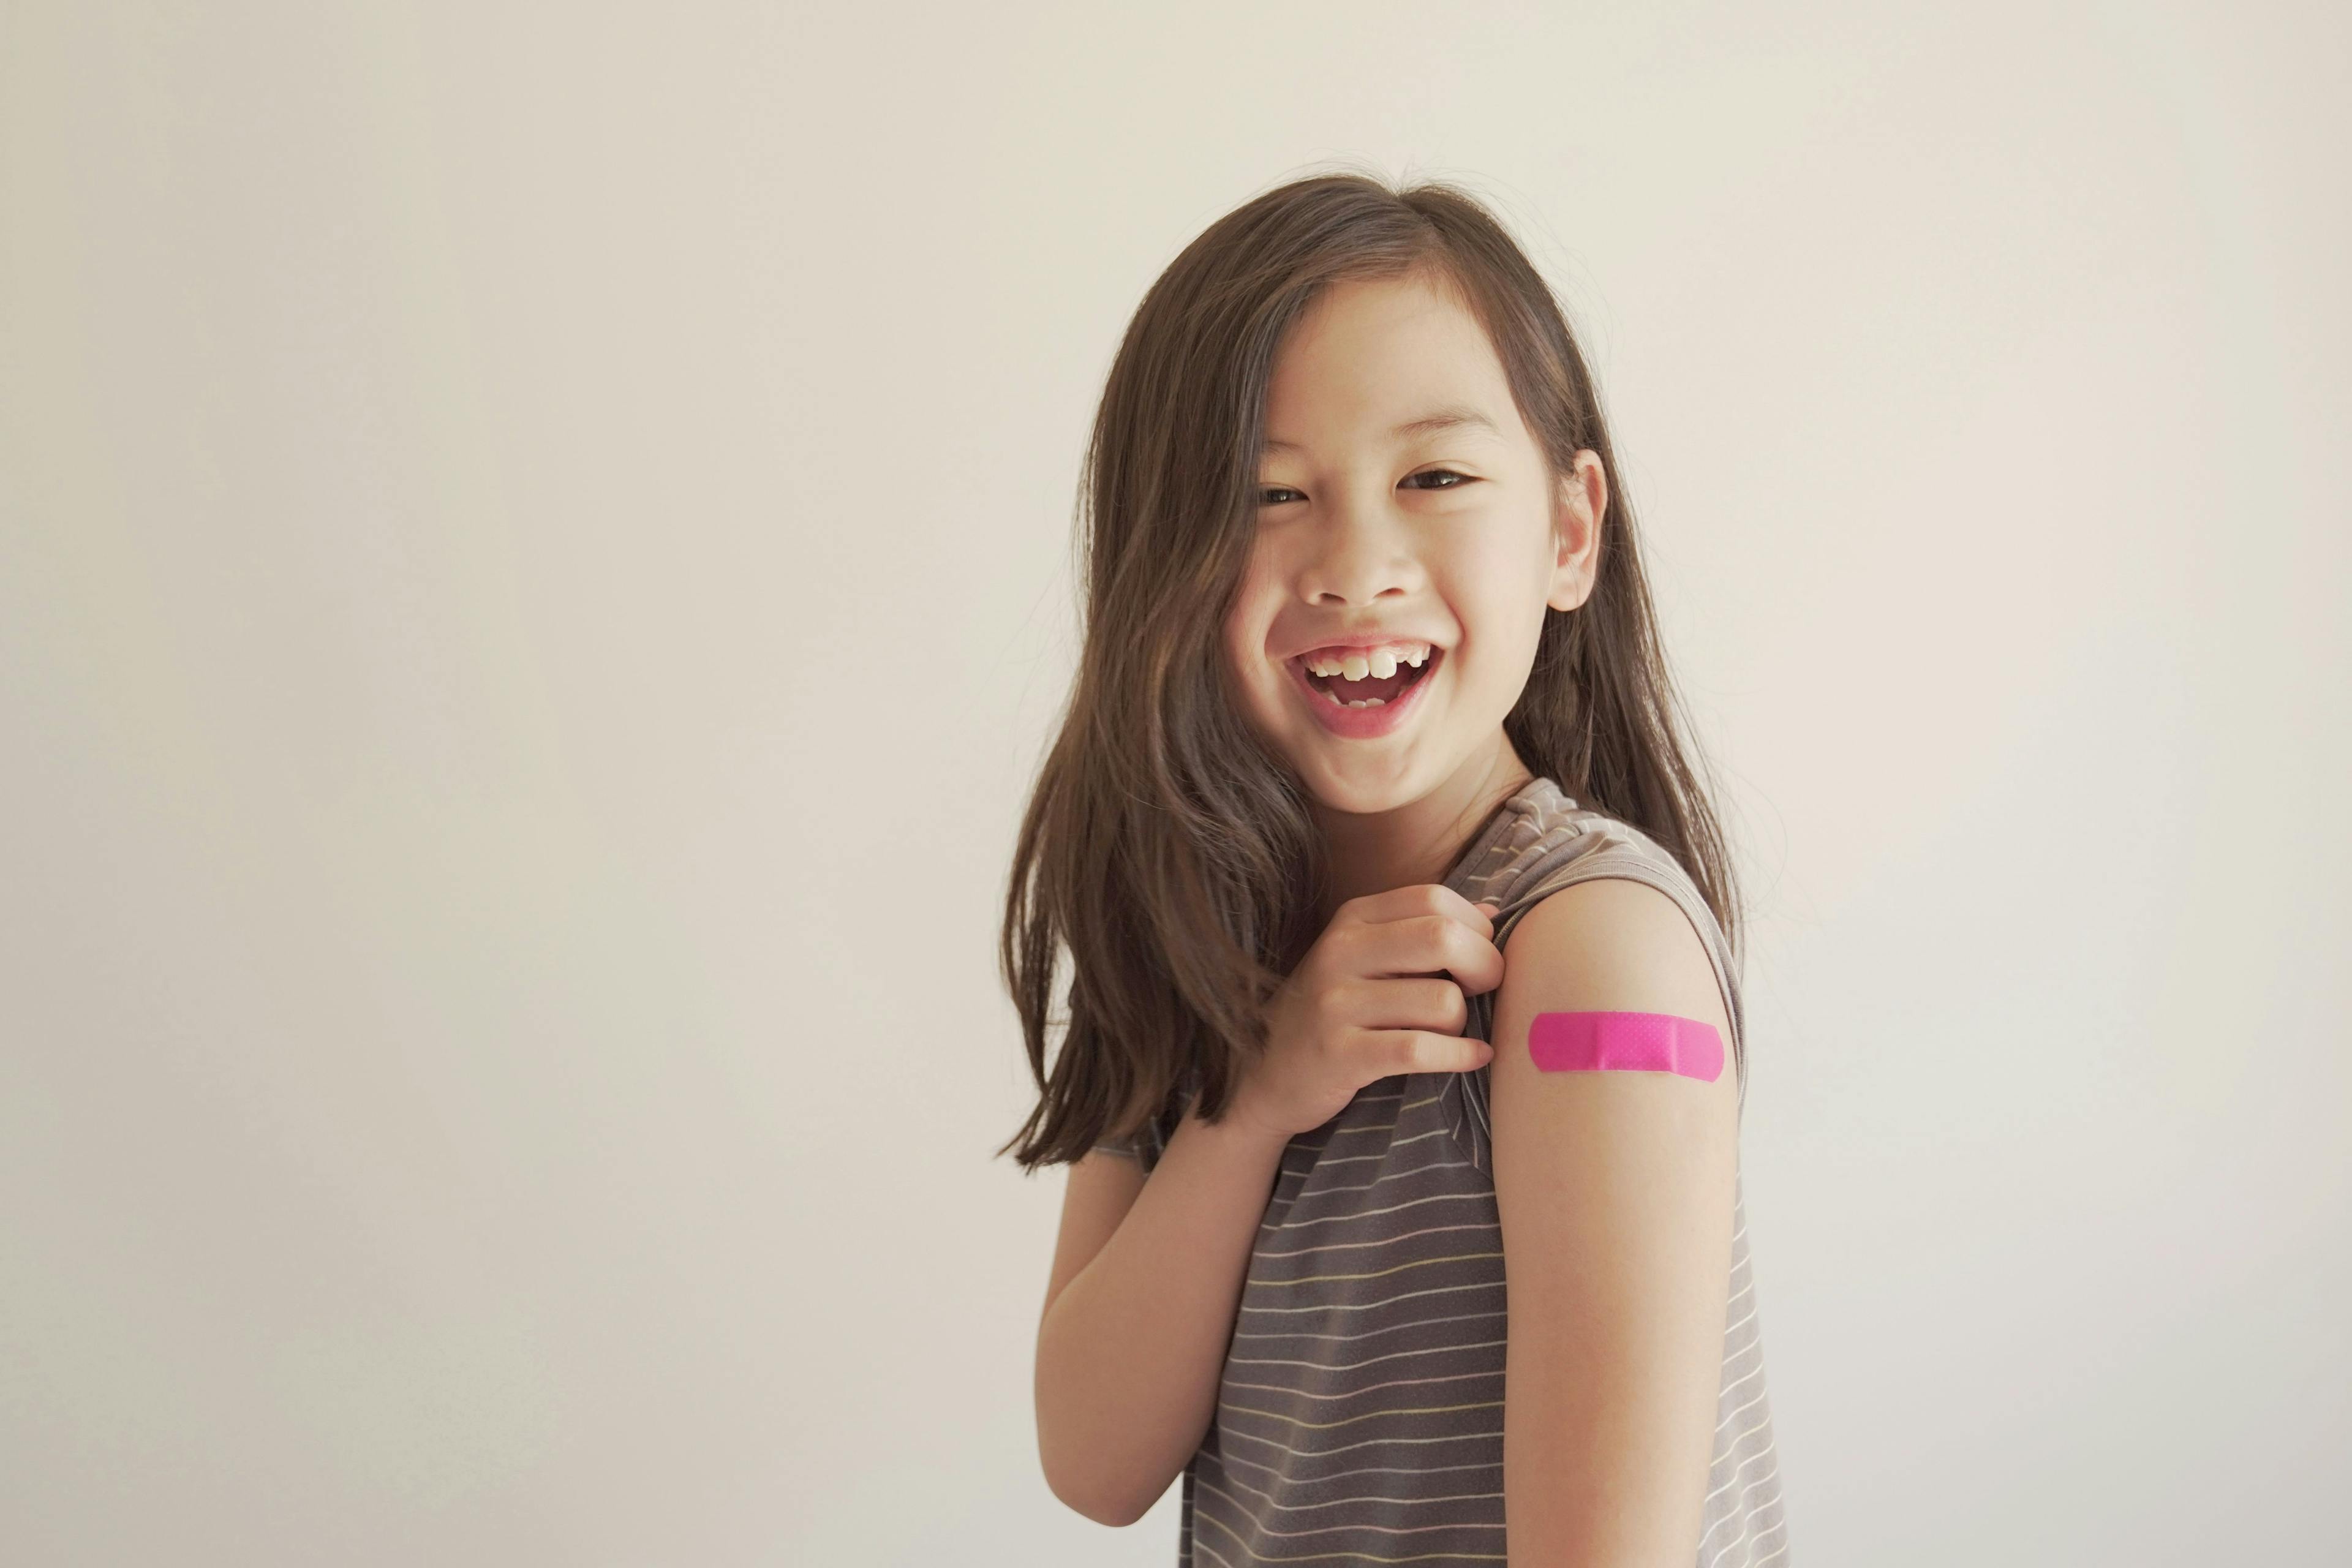 Mixed Asian young girl showing her arm with pink bandage after got vaccinated or inoculation, child immunization, covid omicron vaccine concept | Image Credit: SewcreamStudio - stock.adobe.com